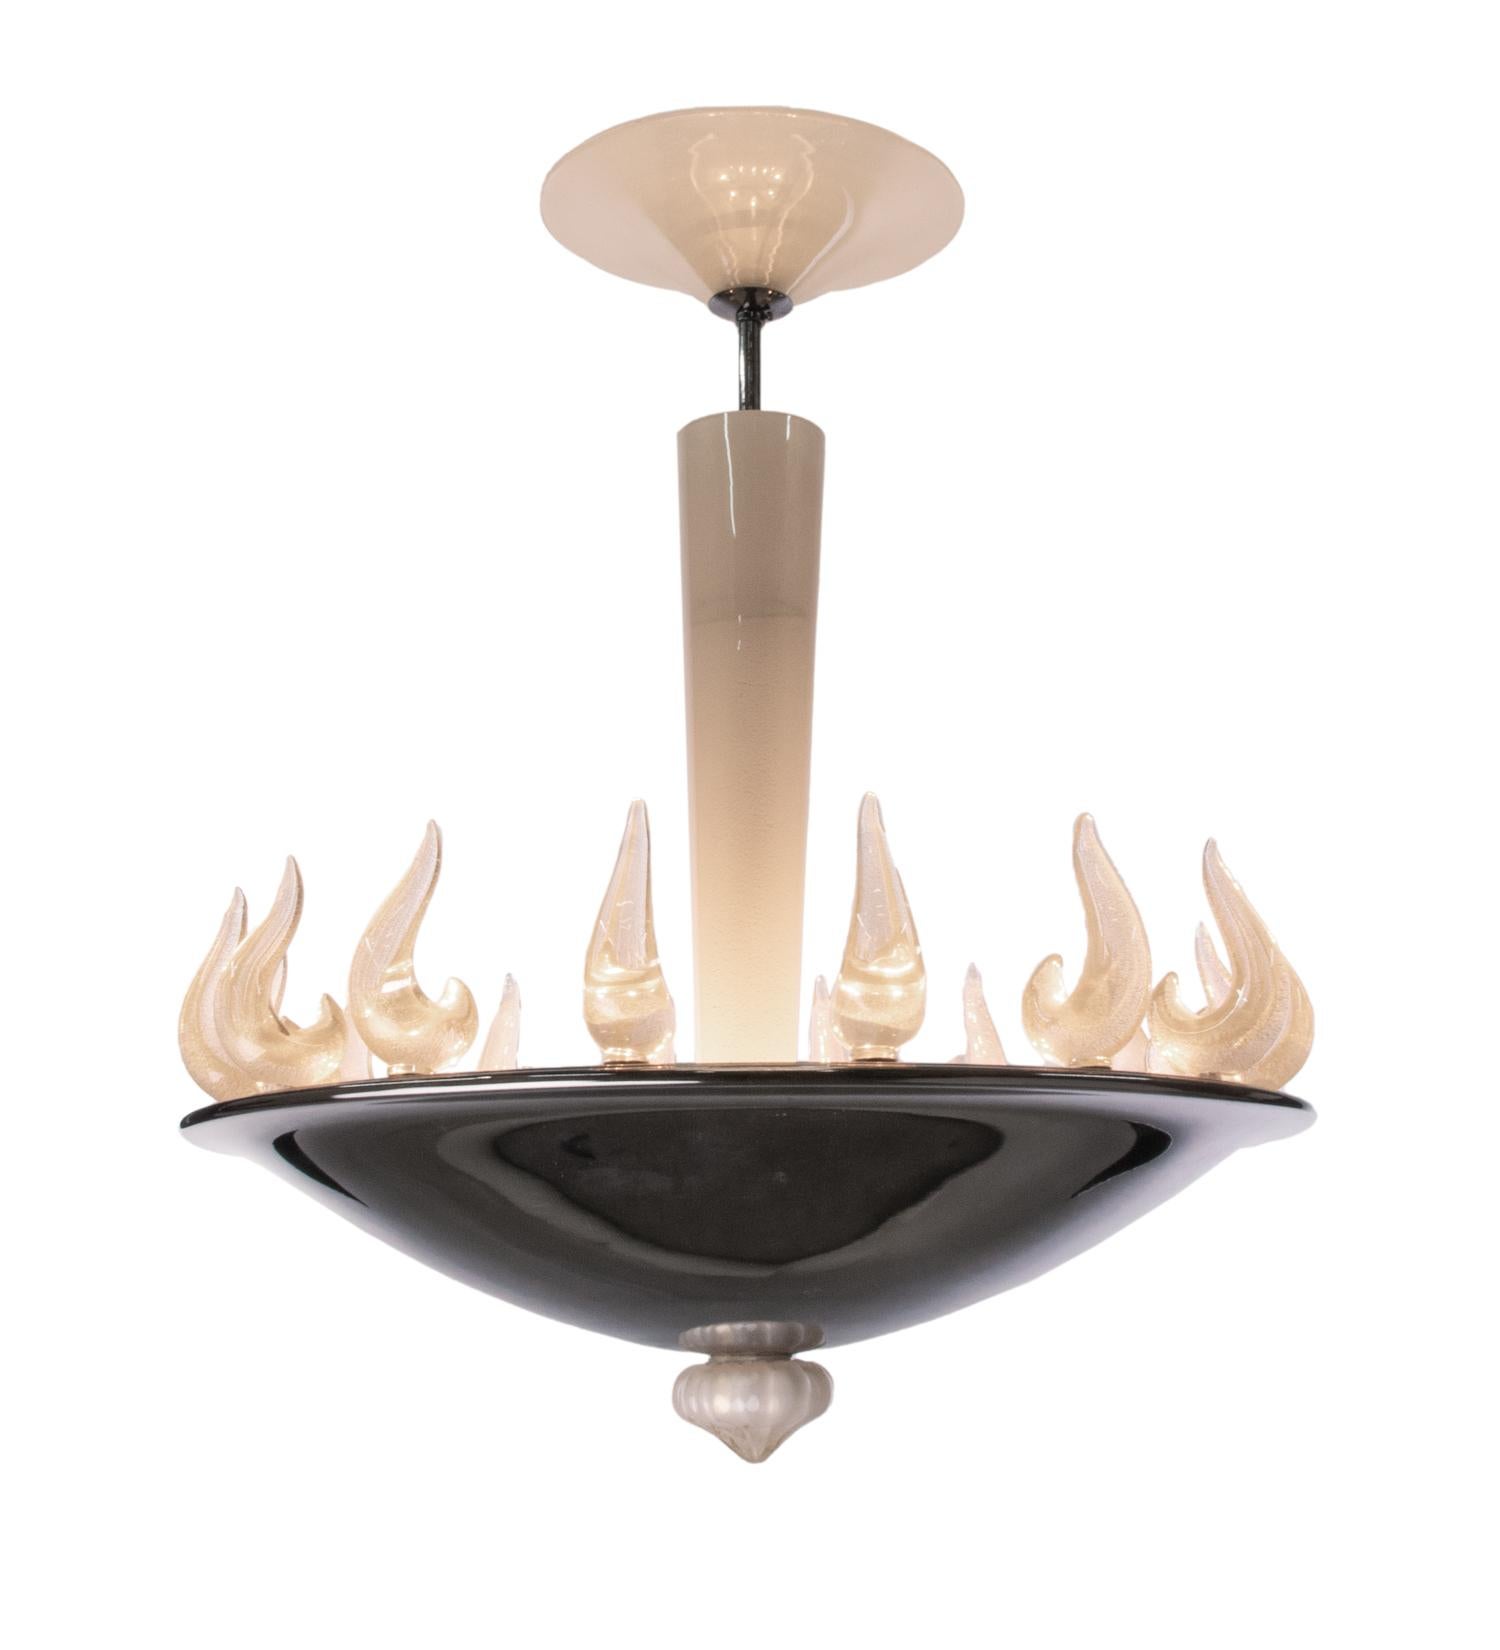 Italian Vintage Murano Glass Flame Chandelier in the manner of Barovier & Toso 1950s For Sale